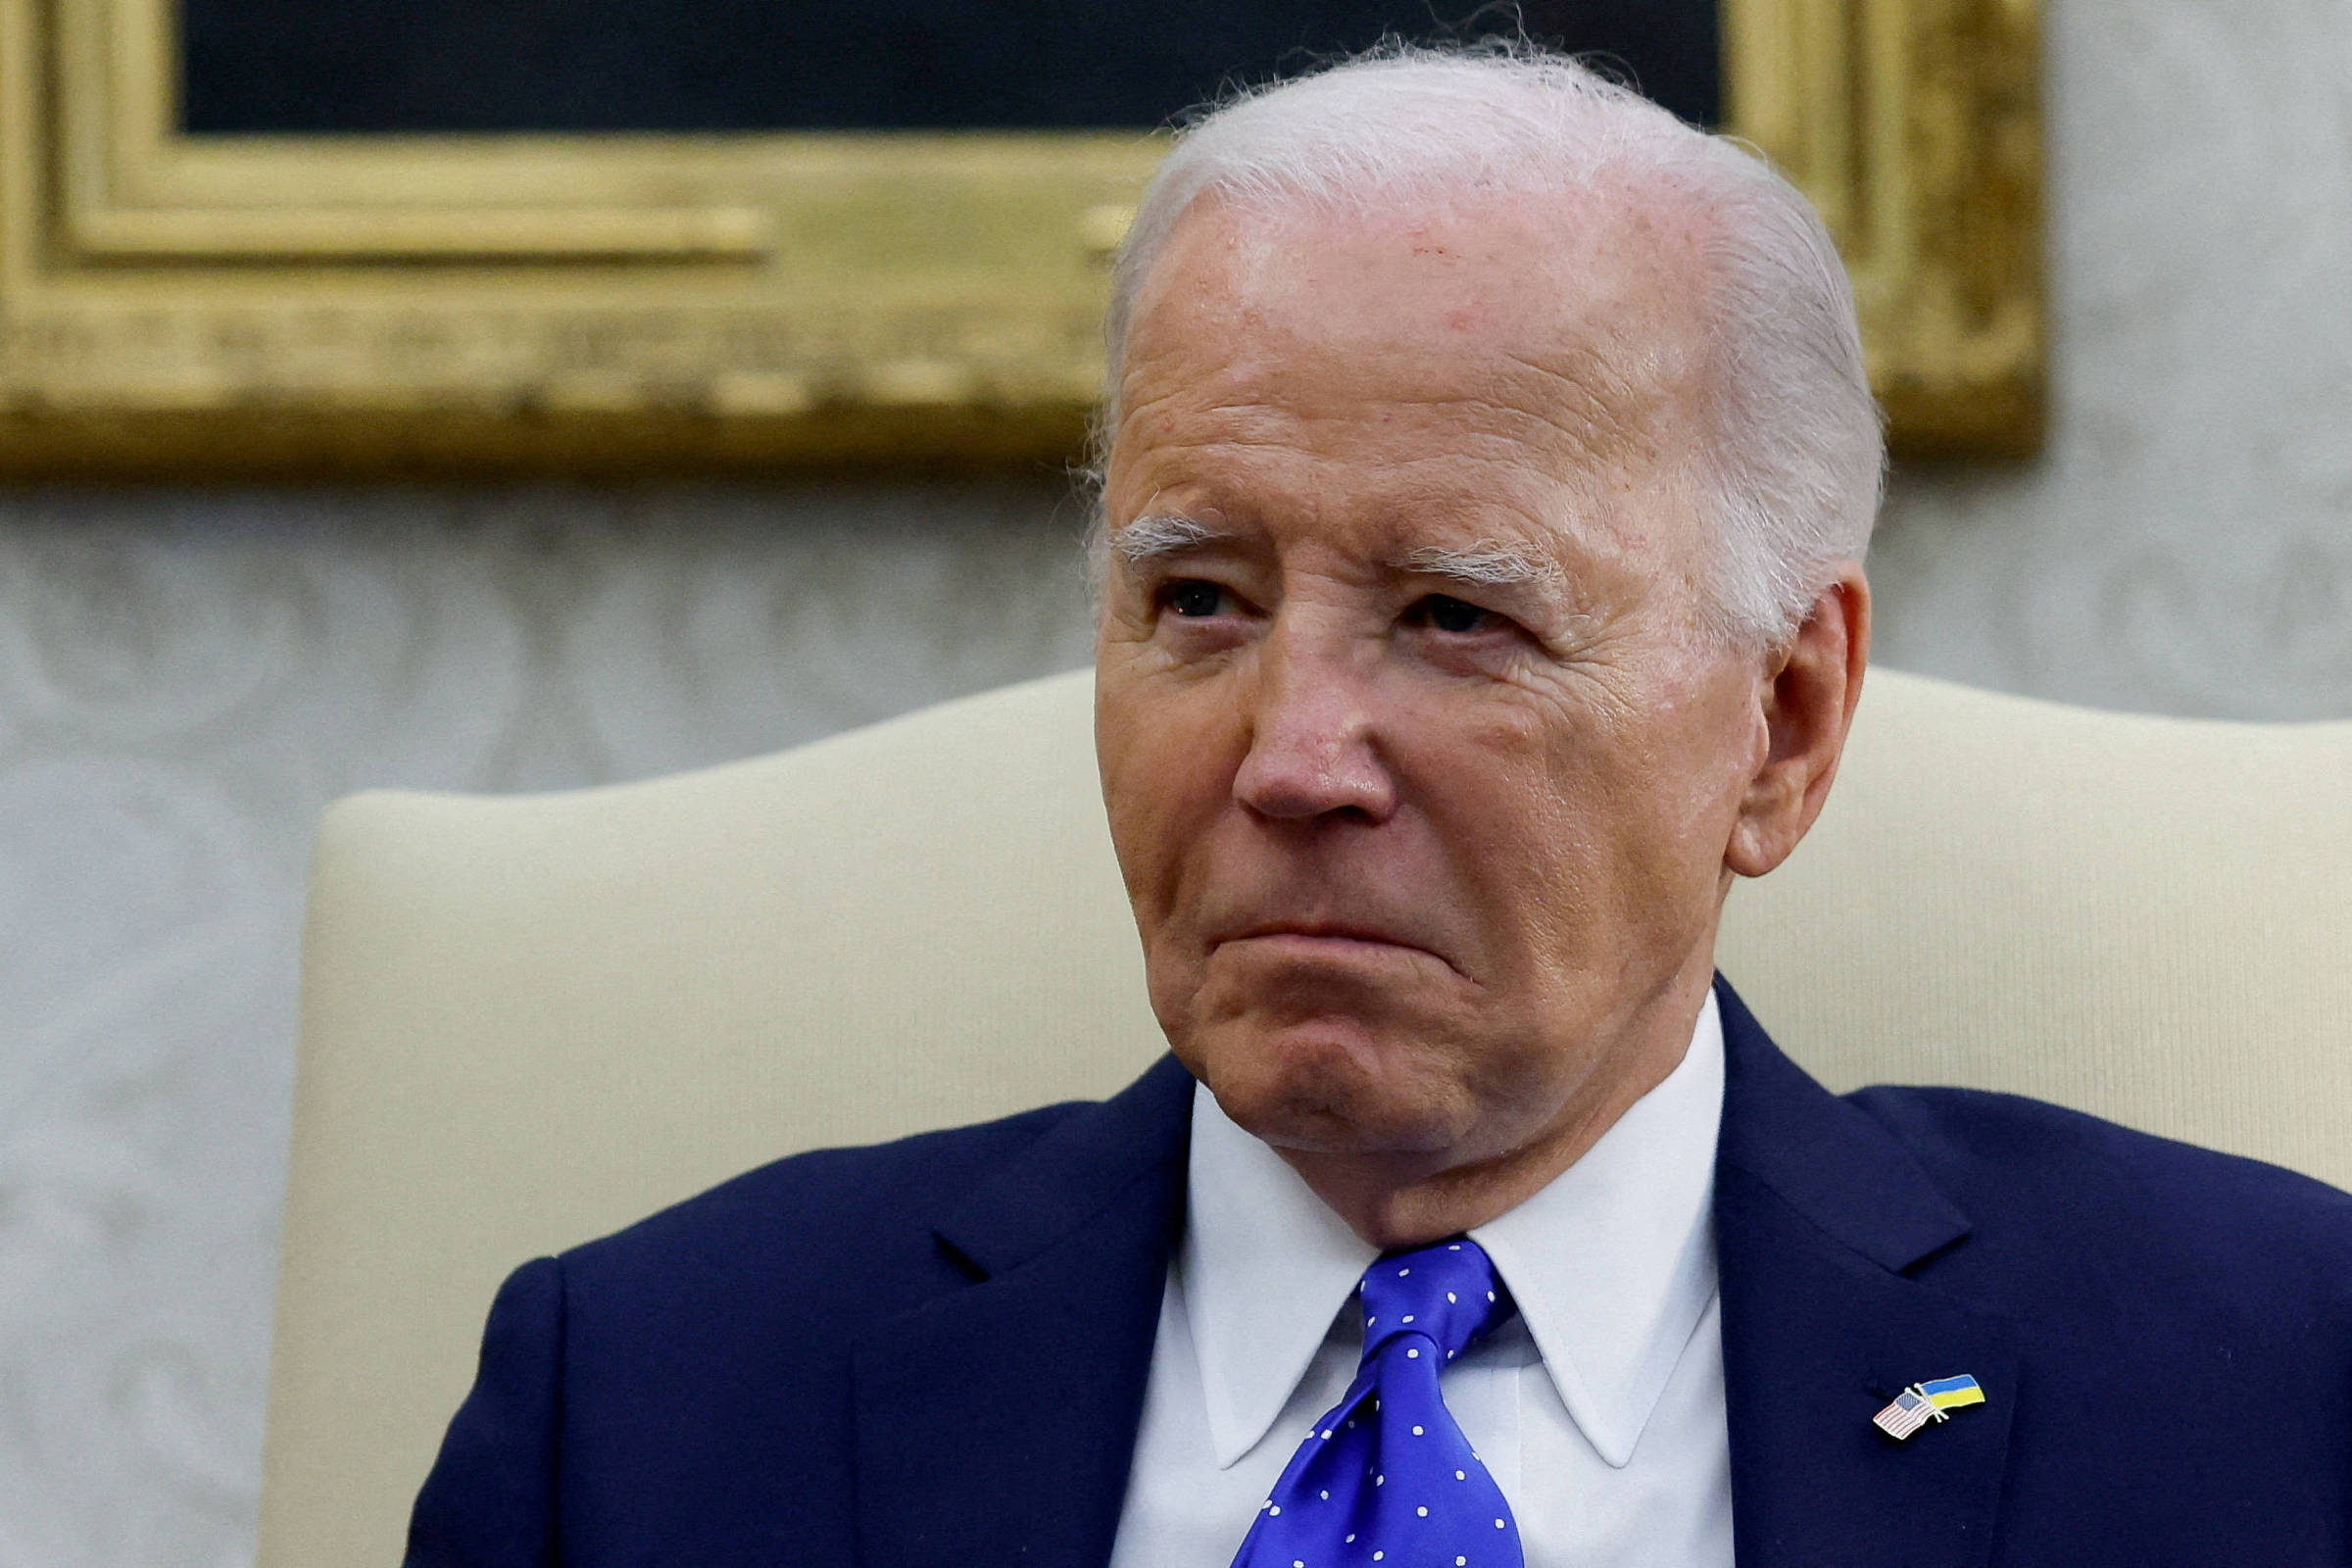 Age hurts Biden more than Trump in the race for US President